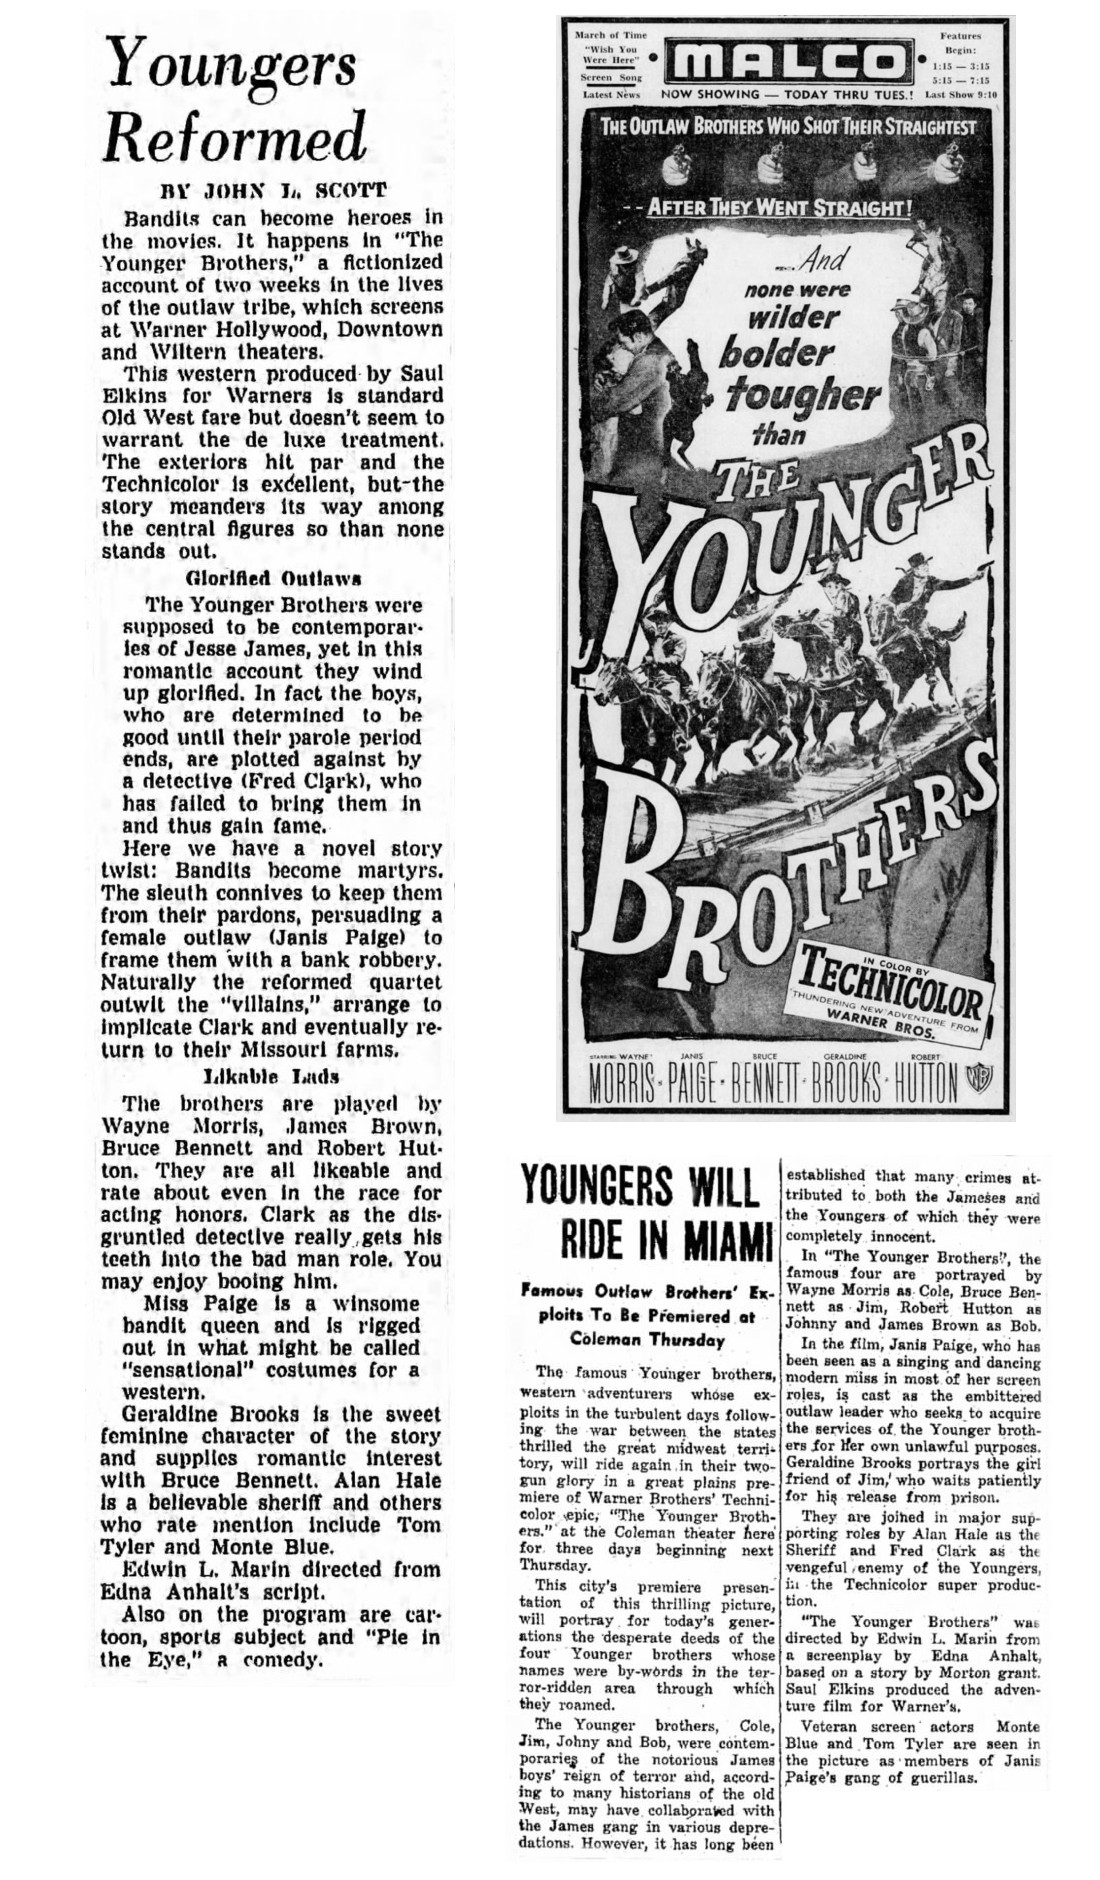 The Younger Brothers cinema ad film reviews